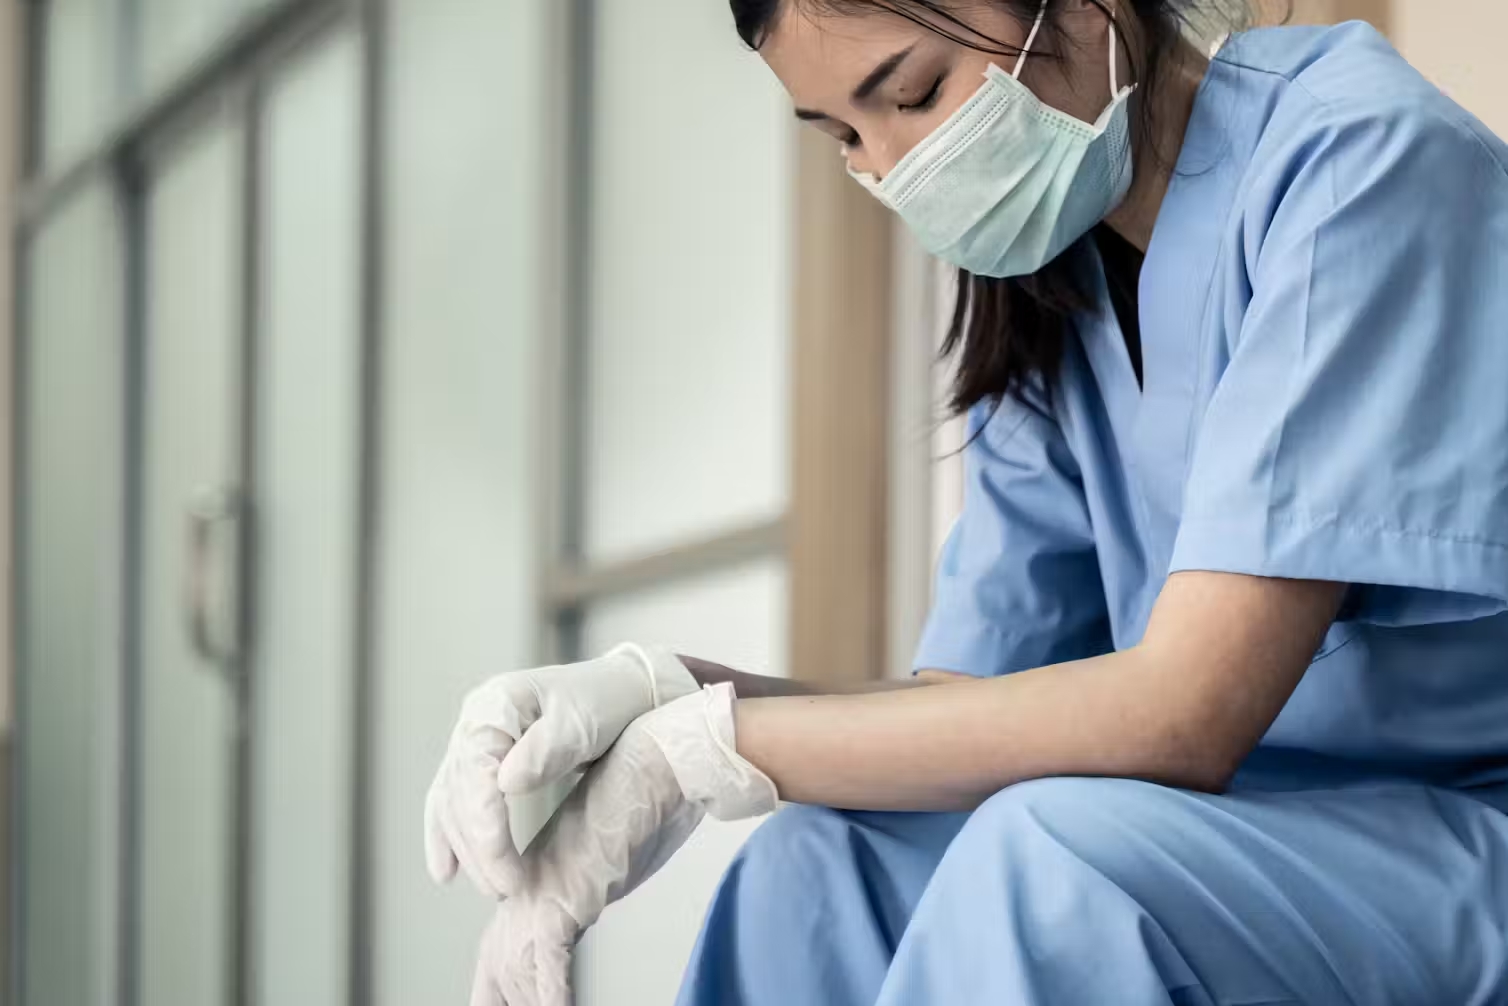 A health-care worker in blue scrubs and a face mask looking tired.